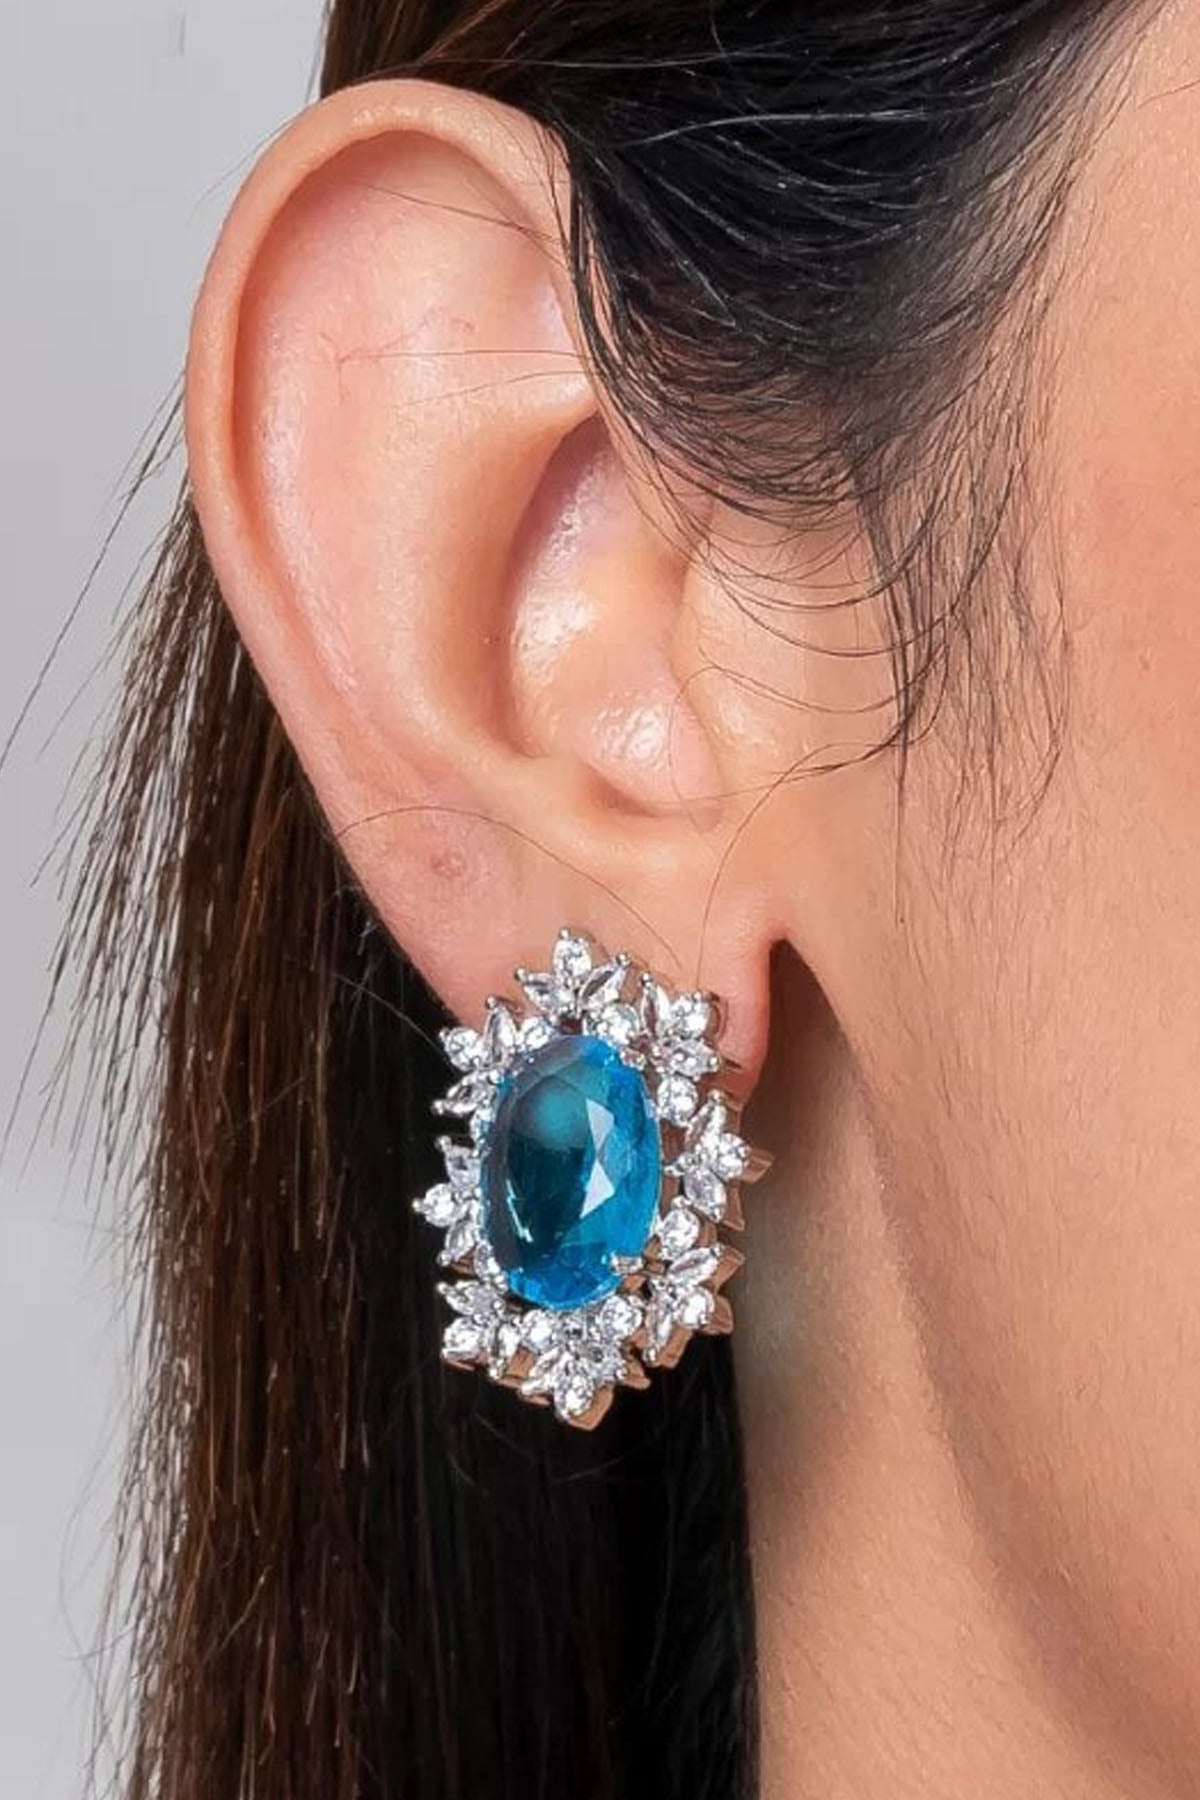 Aqua Oval Diamond Earrings of Brand Putstyle Available online at ScrollnShops